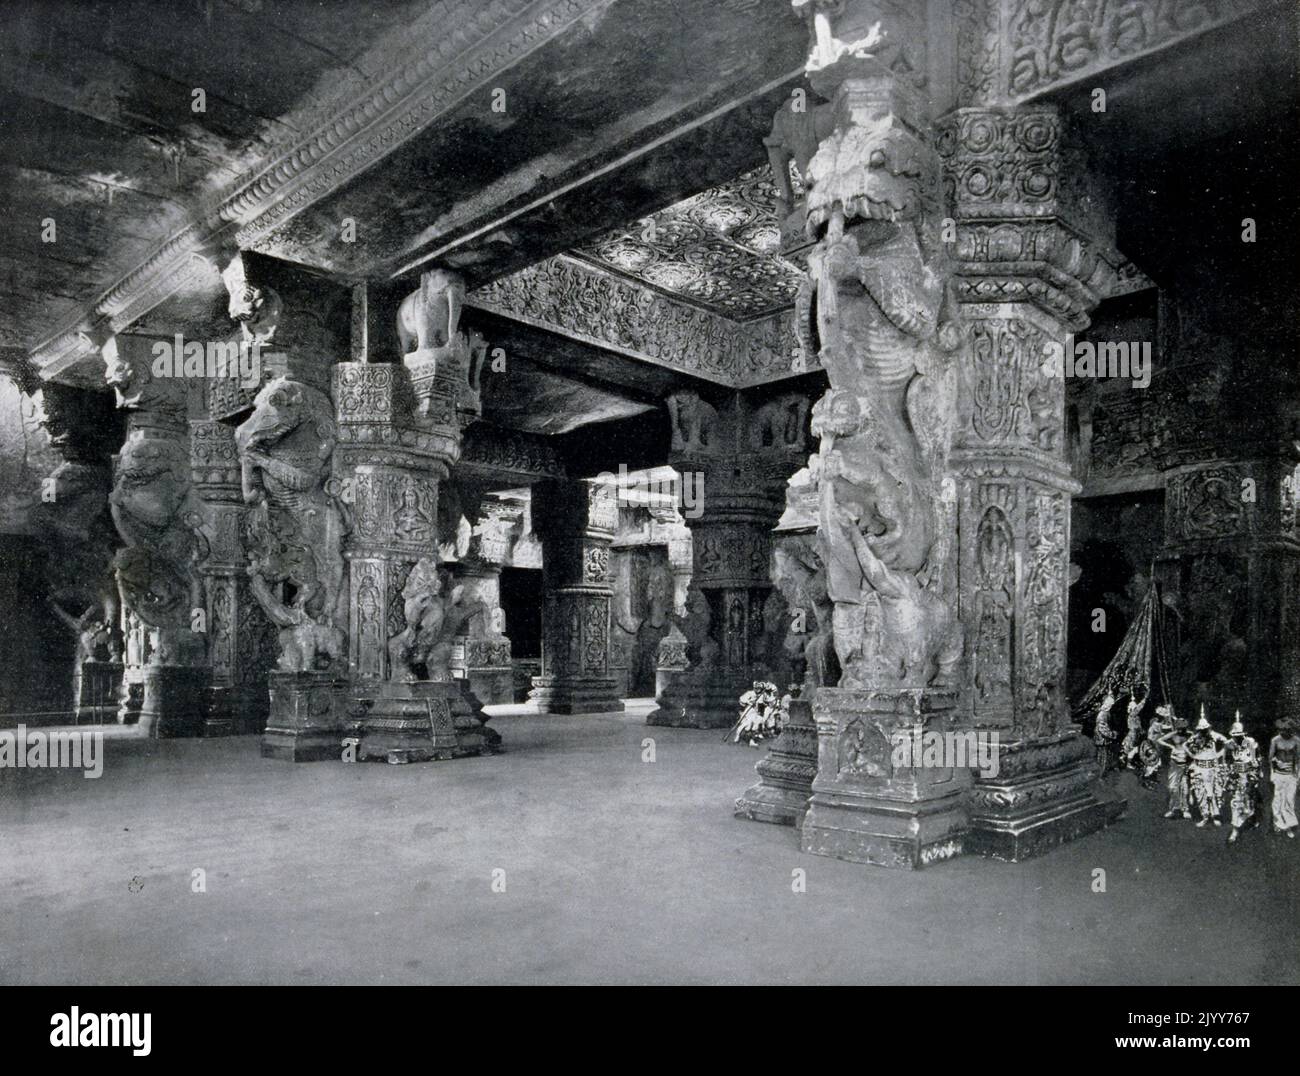 Exposition Universelle (World Fair) Paris, 1900; black and white photograph of an interior perspective of the Cambodian Exhibit; the Khmer Temple. Stock Photo